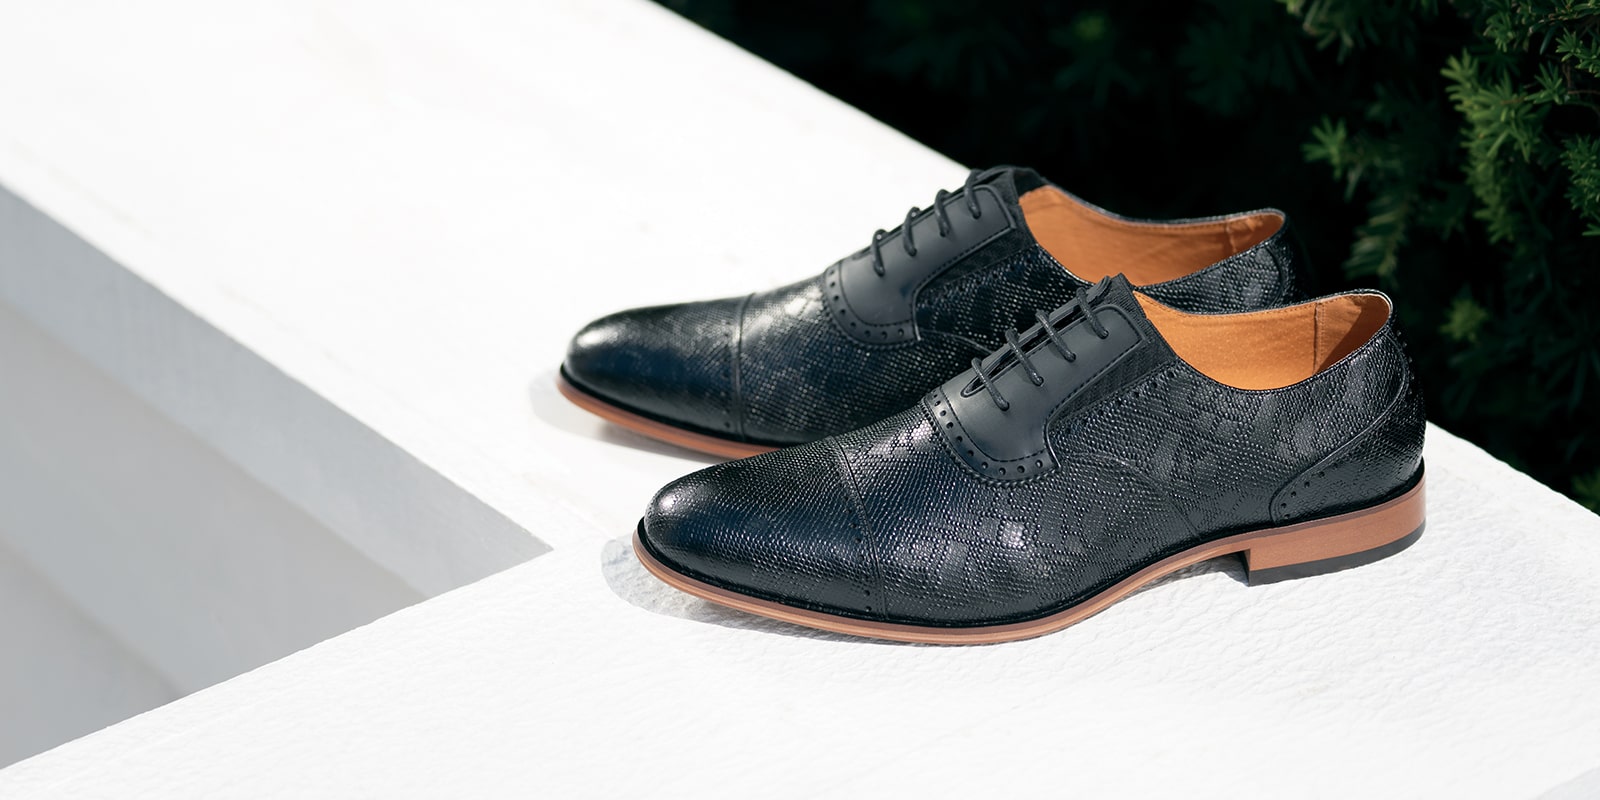 The featured product is the Stratton Cap Toe Oxford in Black.